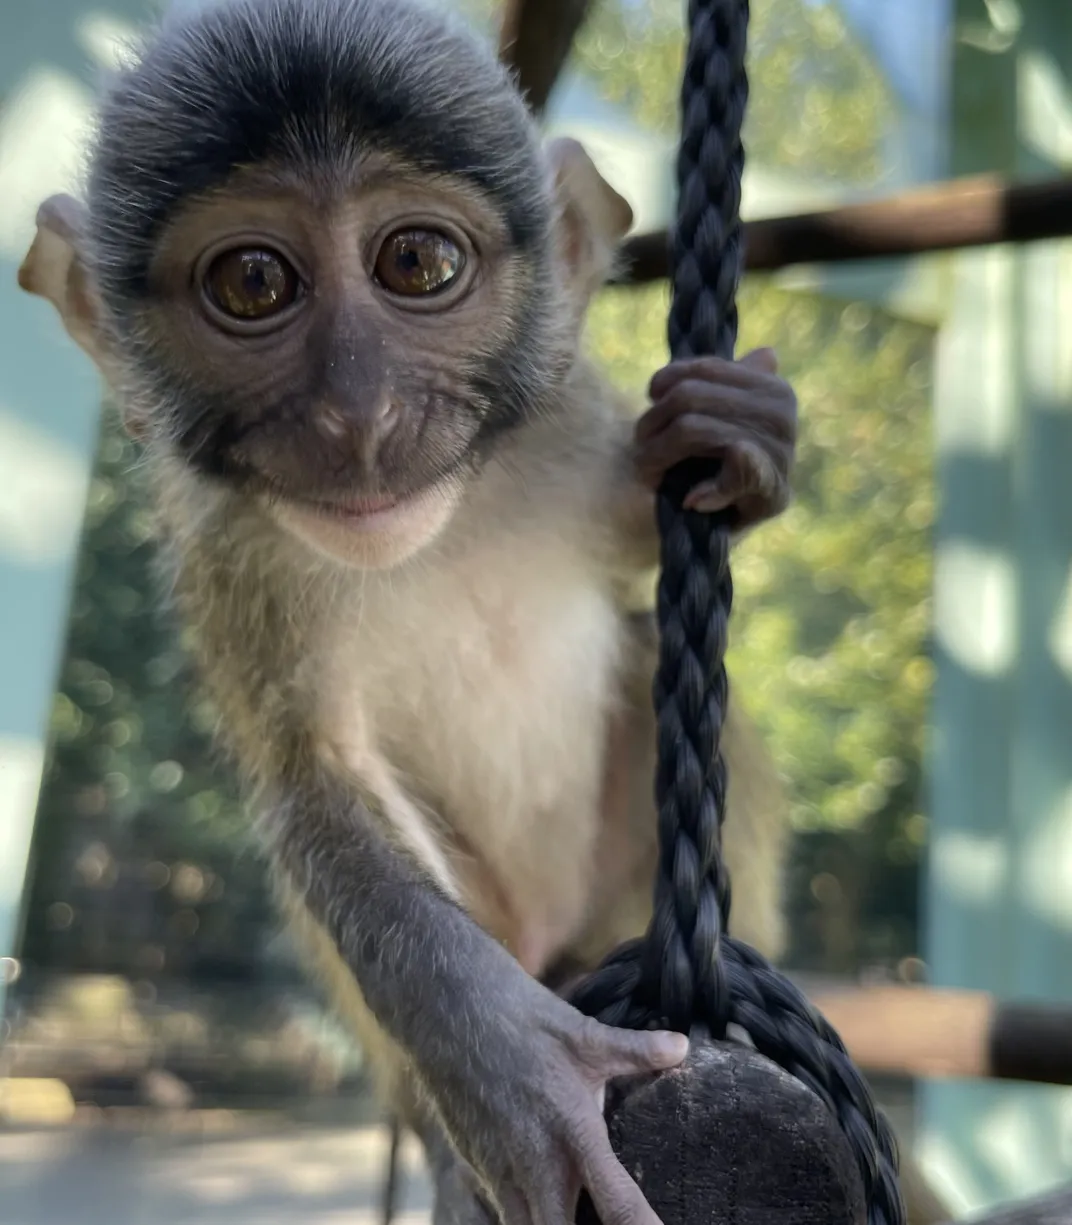 A tiny monkey holds some black nylon rope in the outdoor swamp monkey area at the Zoo.